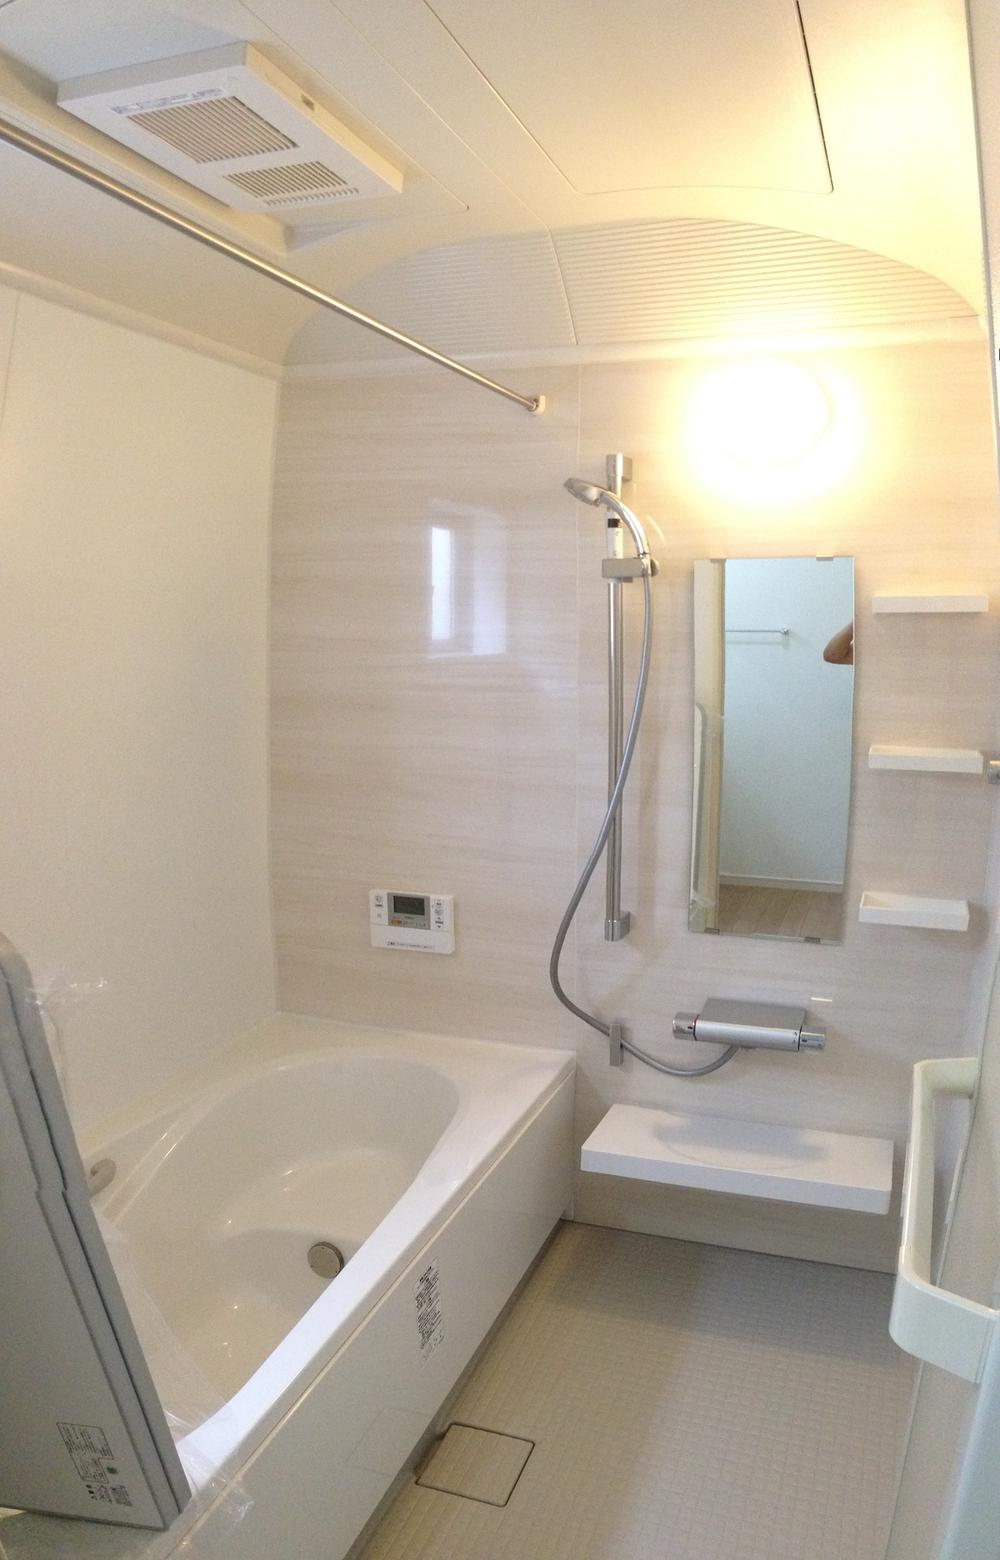 Same specifications photo (bathroom). Ekobenchi tub sitz bath can be Hot water is less likely to cold Samobasu With bathroom dryer laundry on a rainy day to dry out